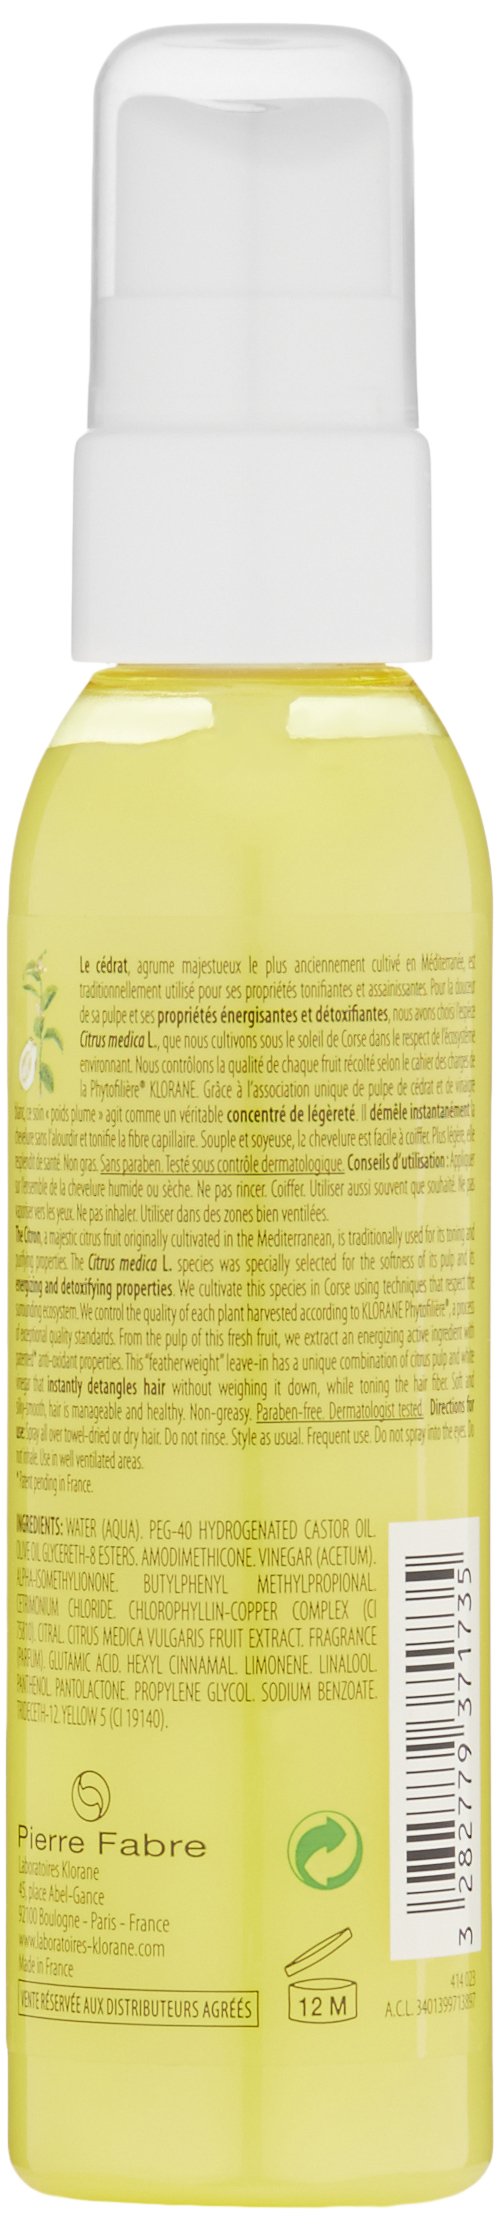 Klorane Leave-in Spray with Citrus Pulp, 0.34 Lb.